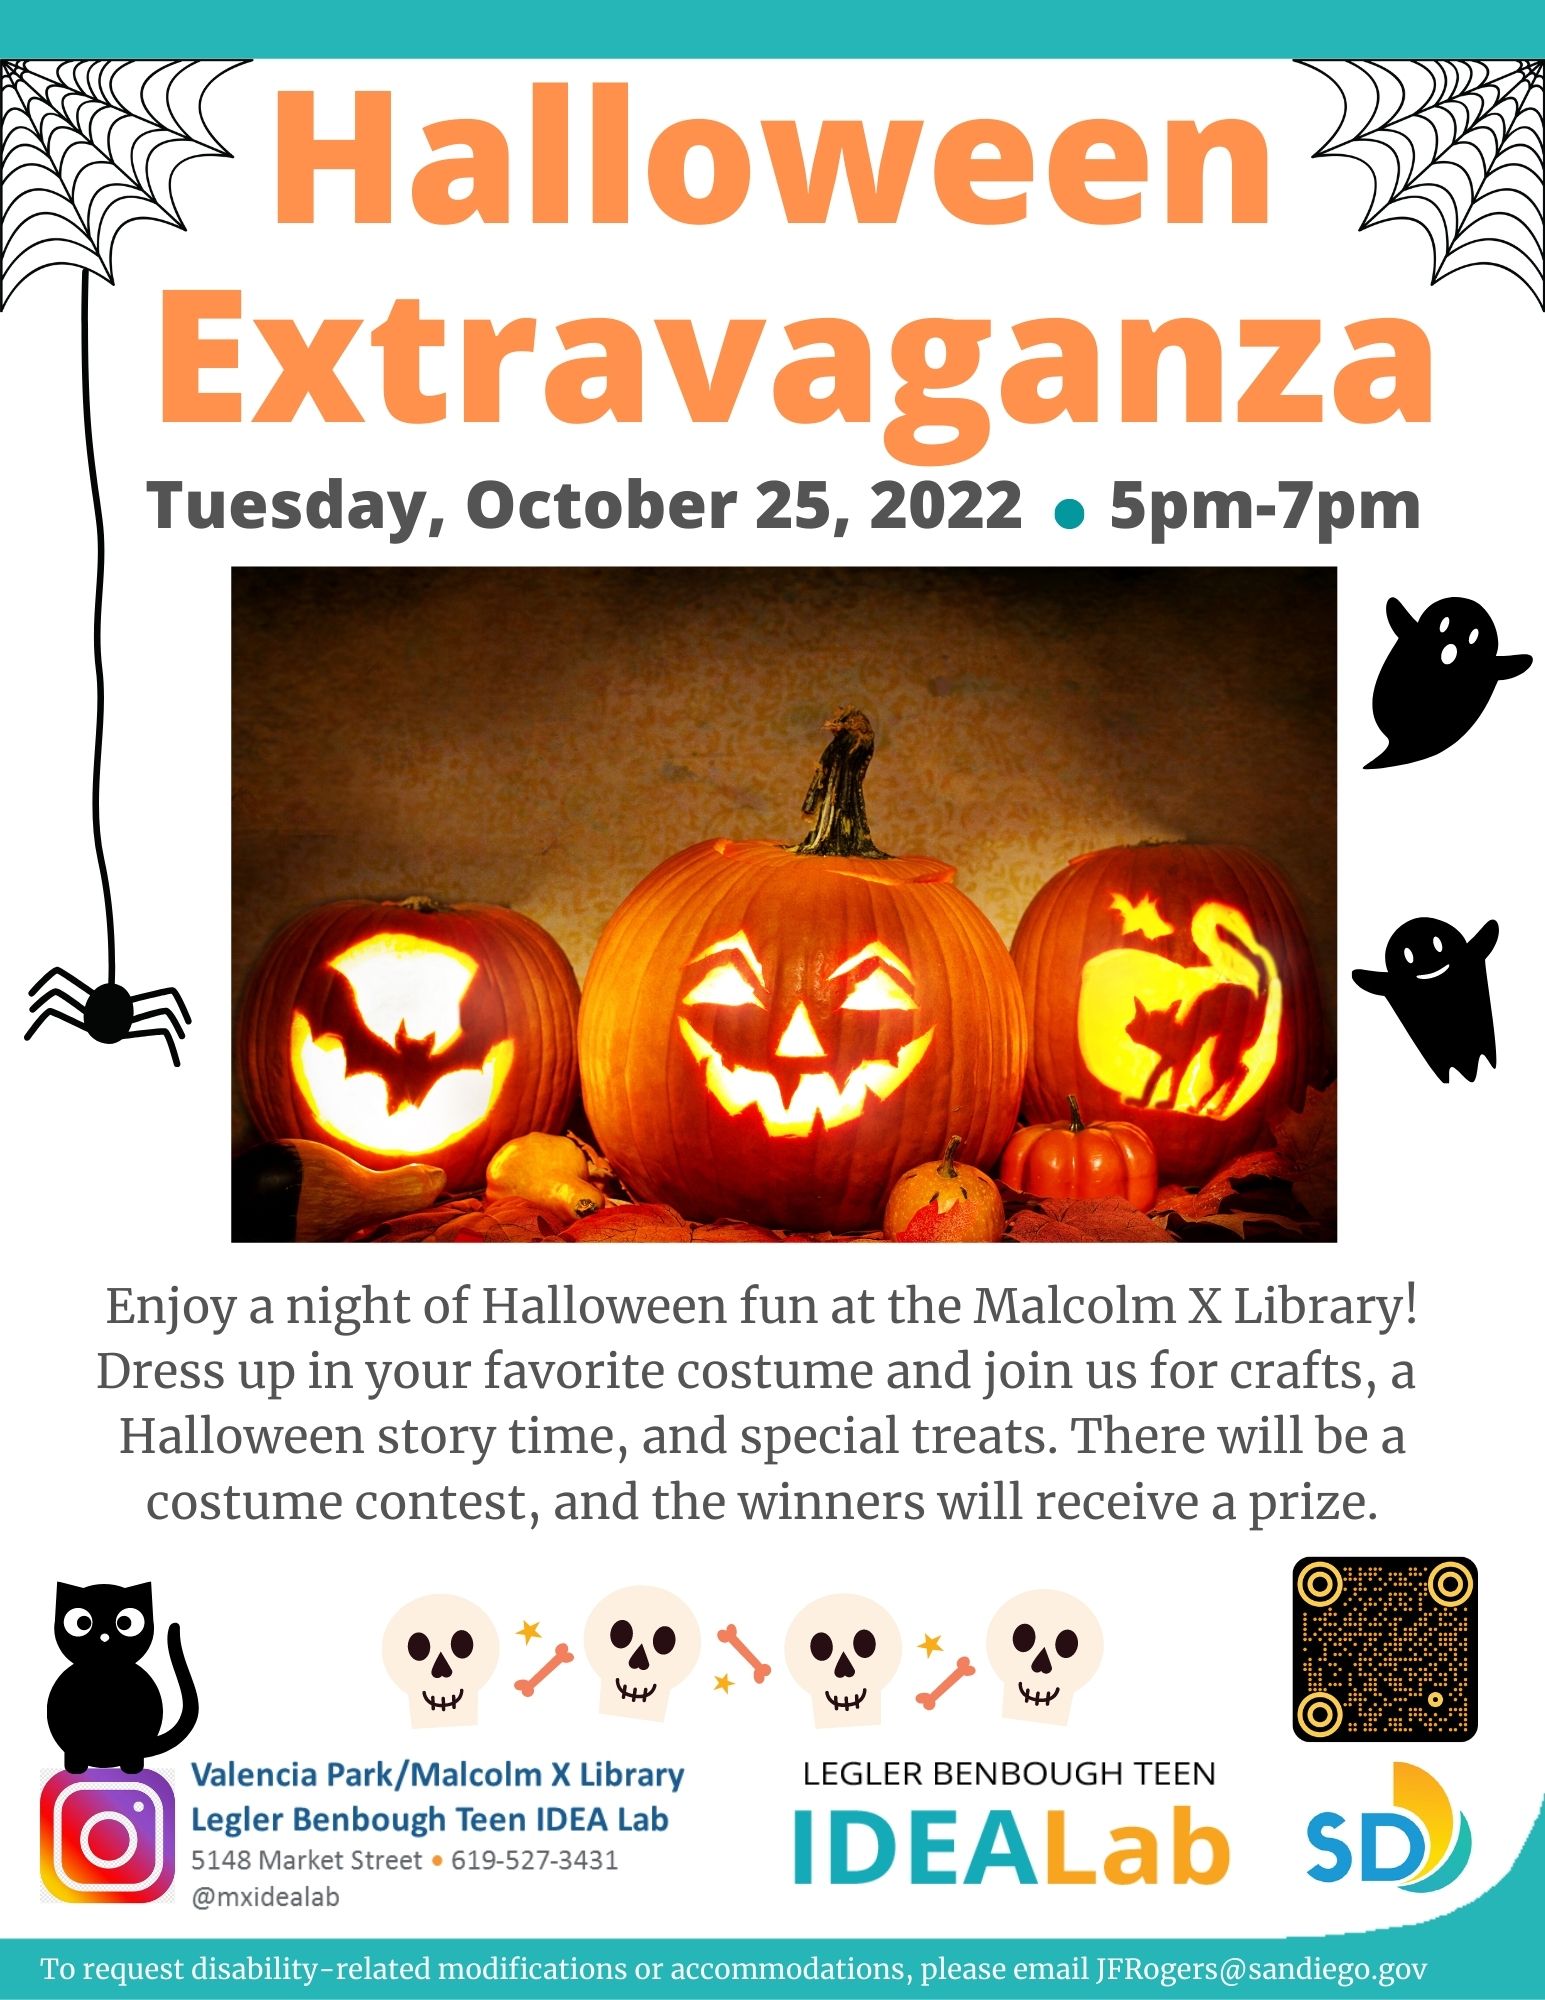 Flyer of Halloween event white flyer with teal background, orange jack-o-laterns with creepy smiles have a glowing candle in them. 